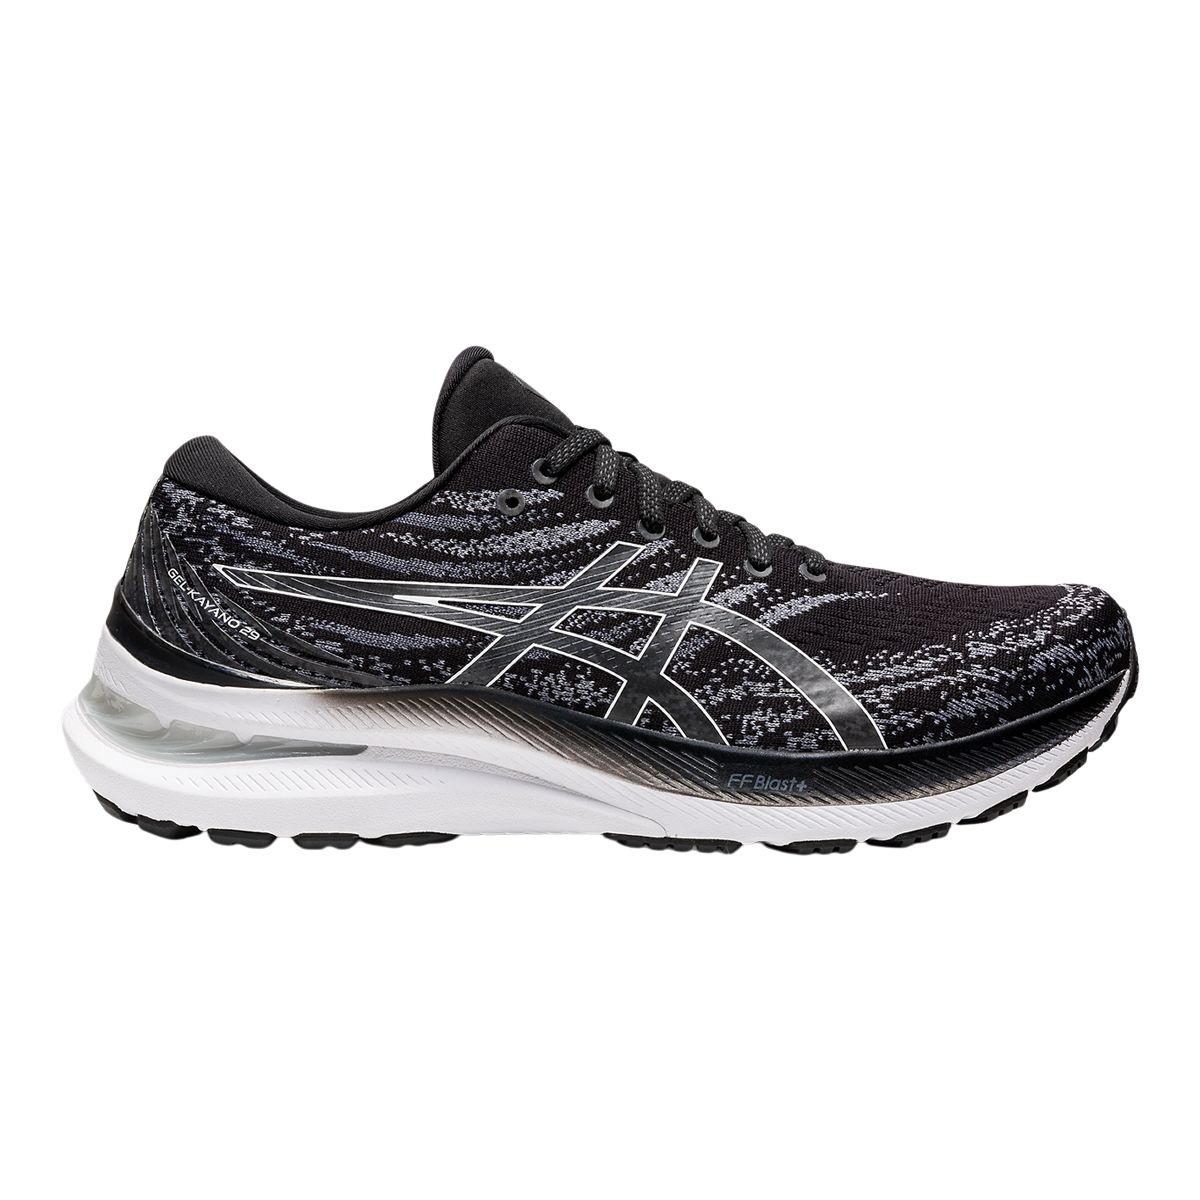 Image of Asics Men's Gel-Kayano 29 Extra Wide Knit Comfortable Running Shoes